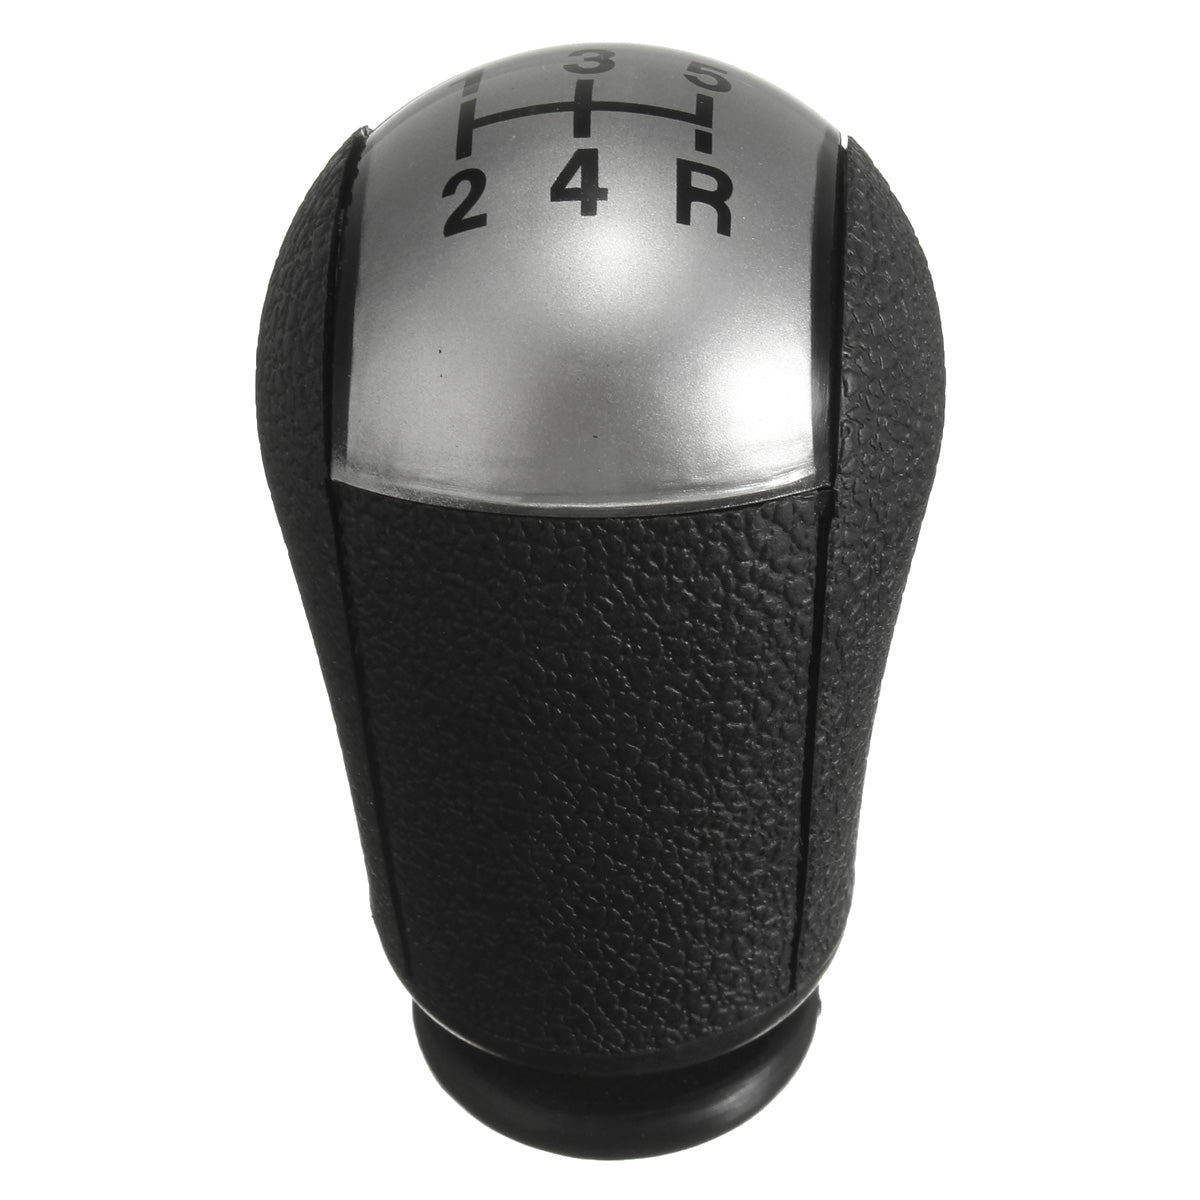 Black 5 Speed Car Gear Stick Shift Knob Handle Ball for Ford Focus Mondeo Transit Galaxy Fiesta Mustang